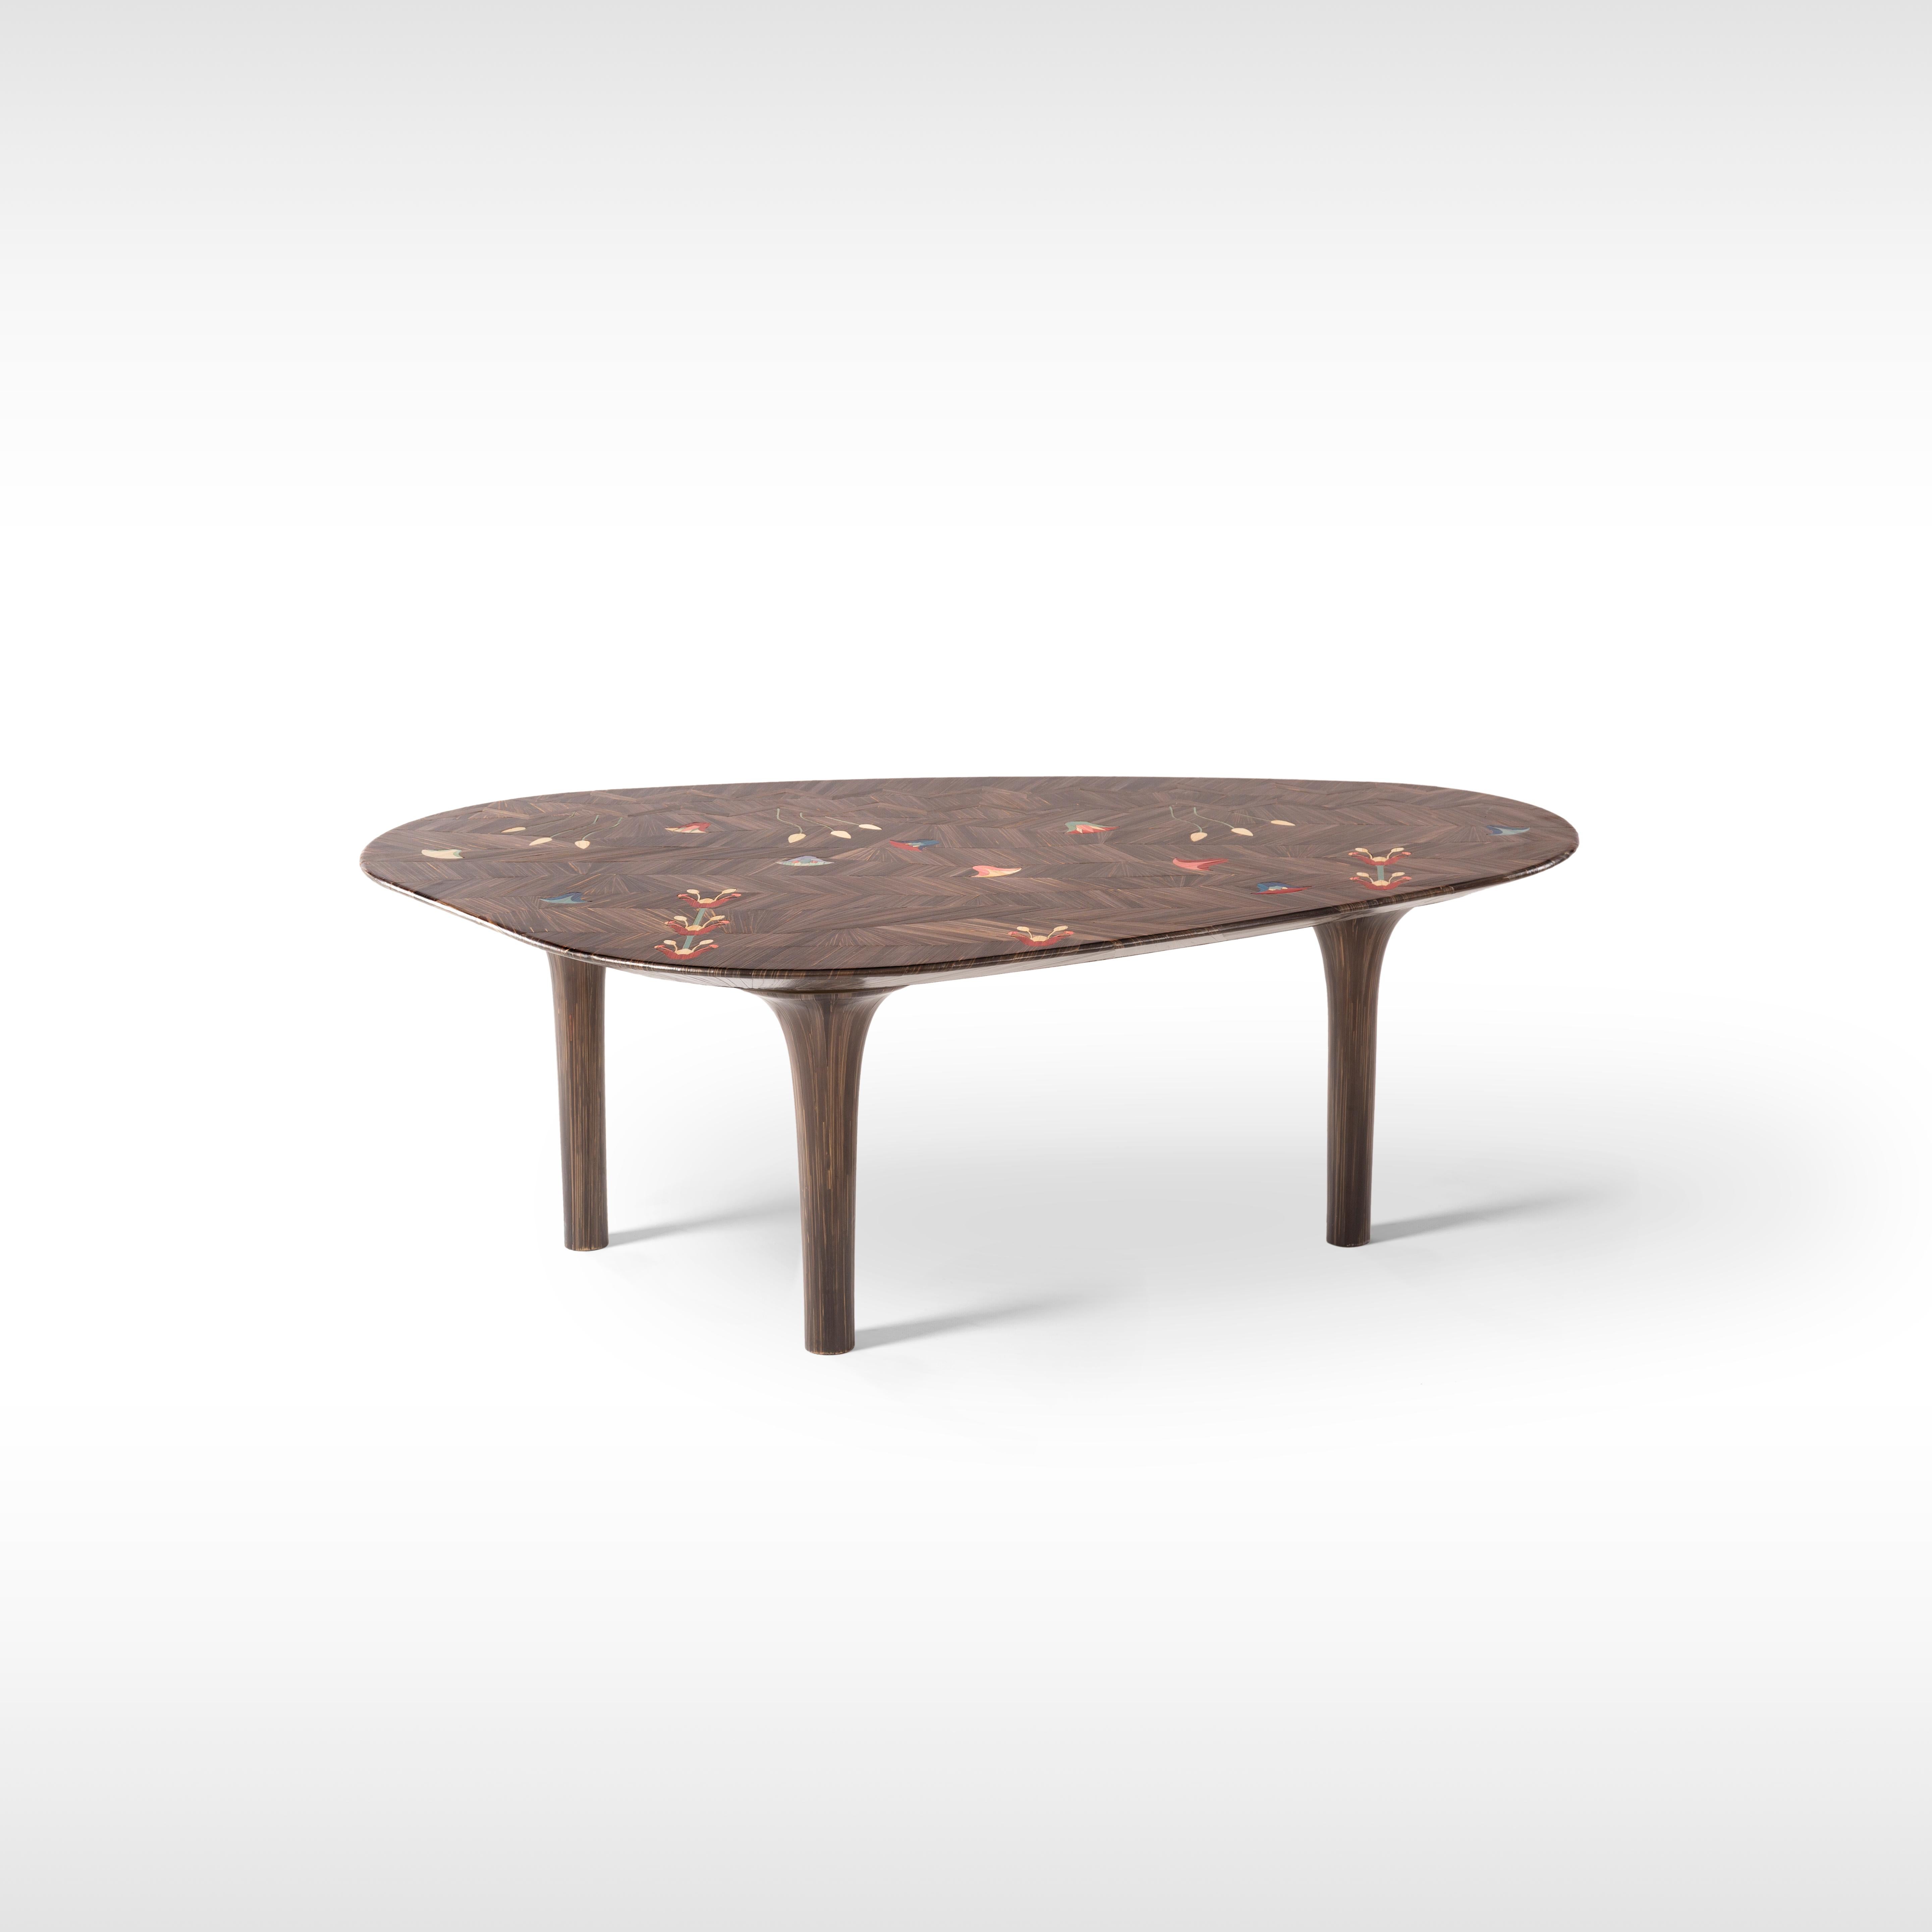 Luxury organic-shaped coffee table with hand-laid bronze straw adorned with hand-crafted colorful lotus flowers.
Adding color, flowers and even more love to our Divine table yields this exquisite jewel of a coffee table. We added another layer of